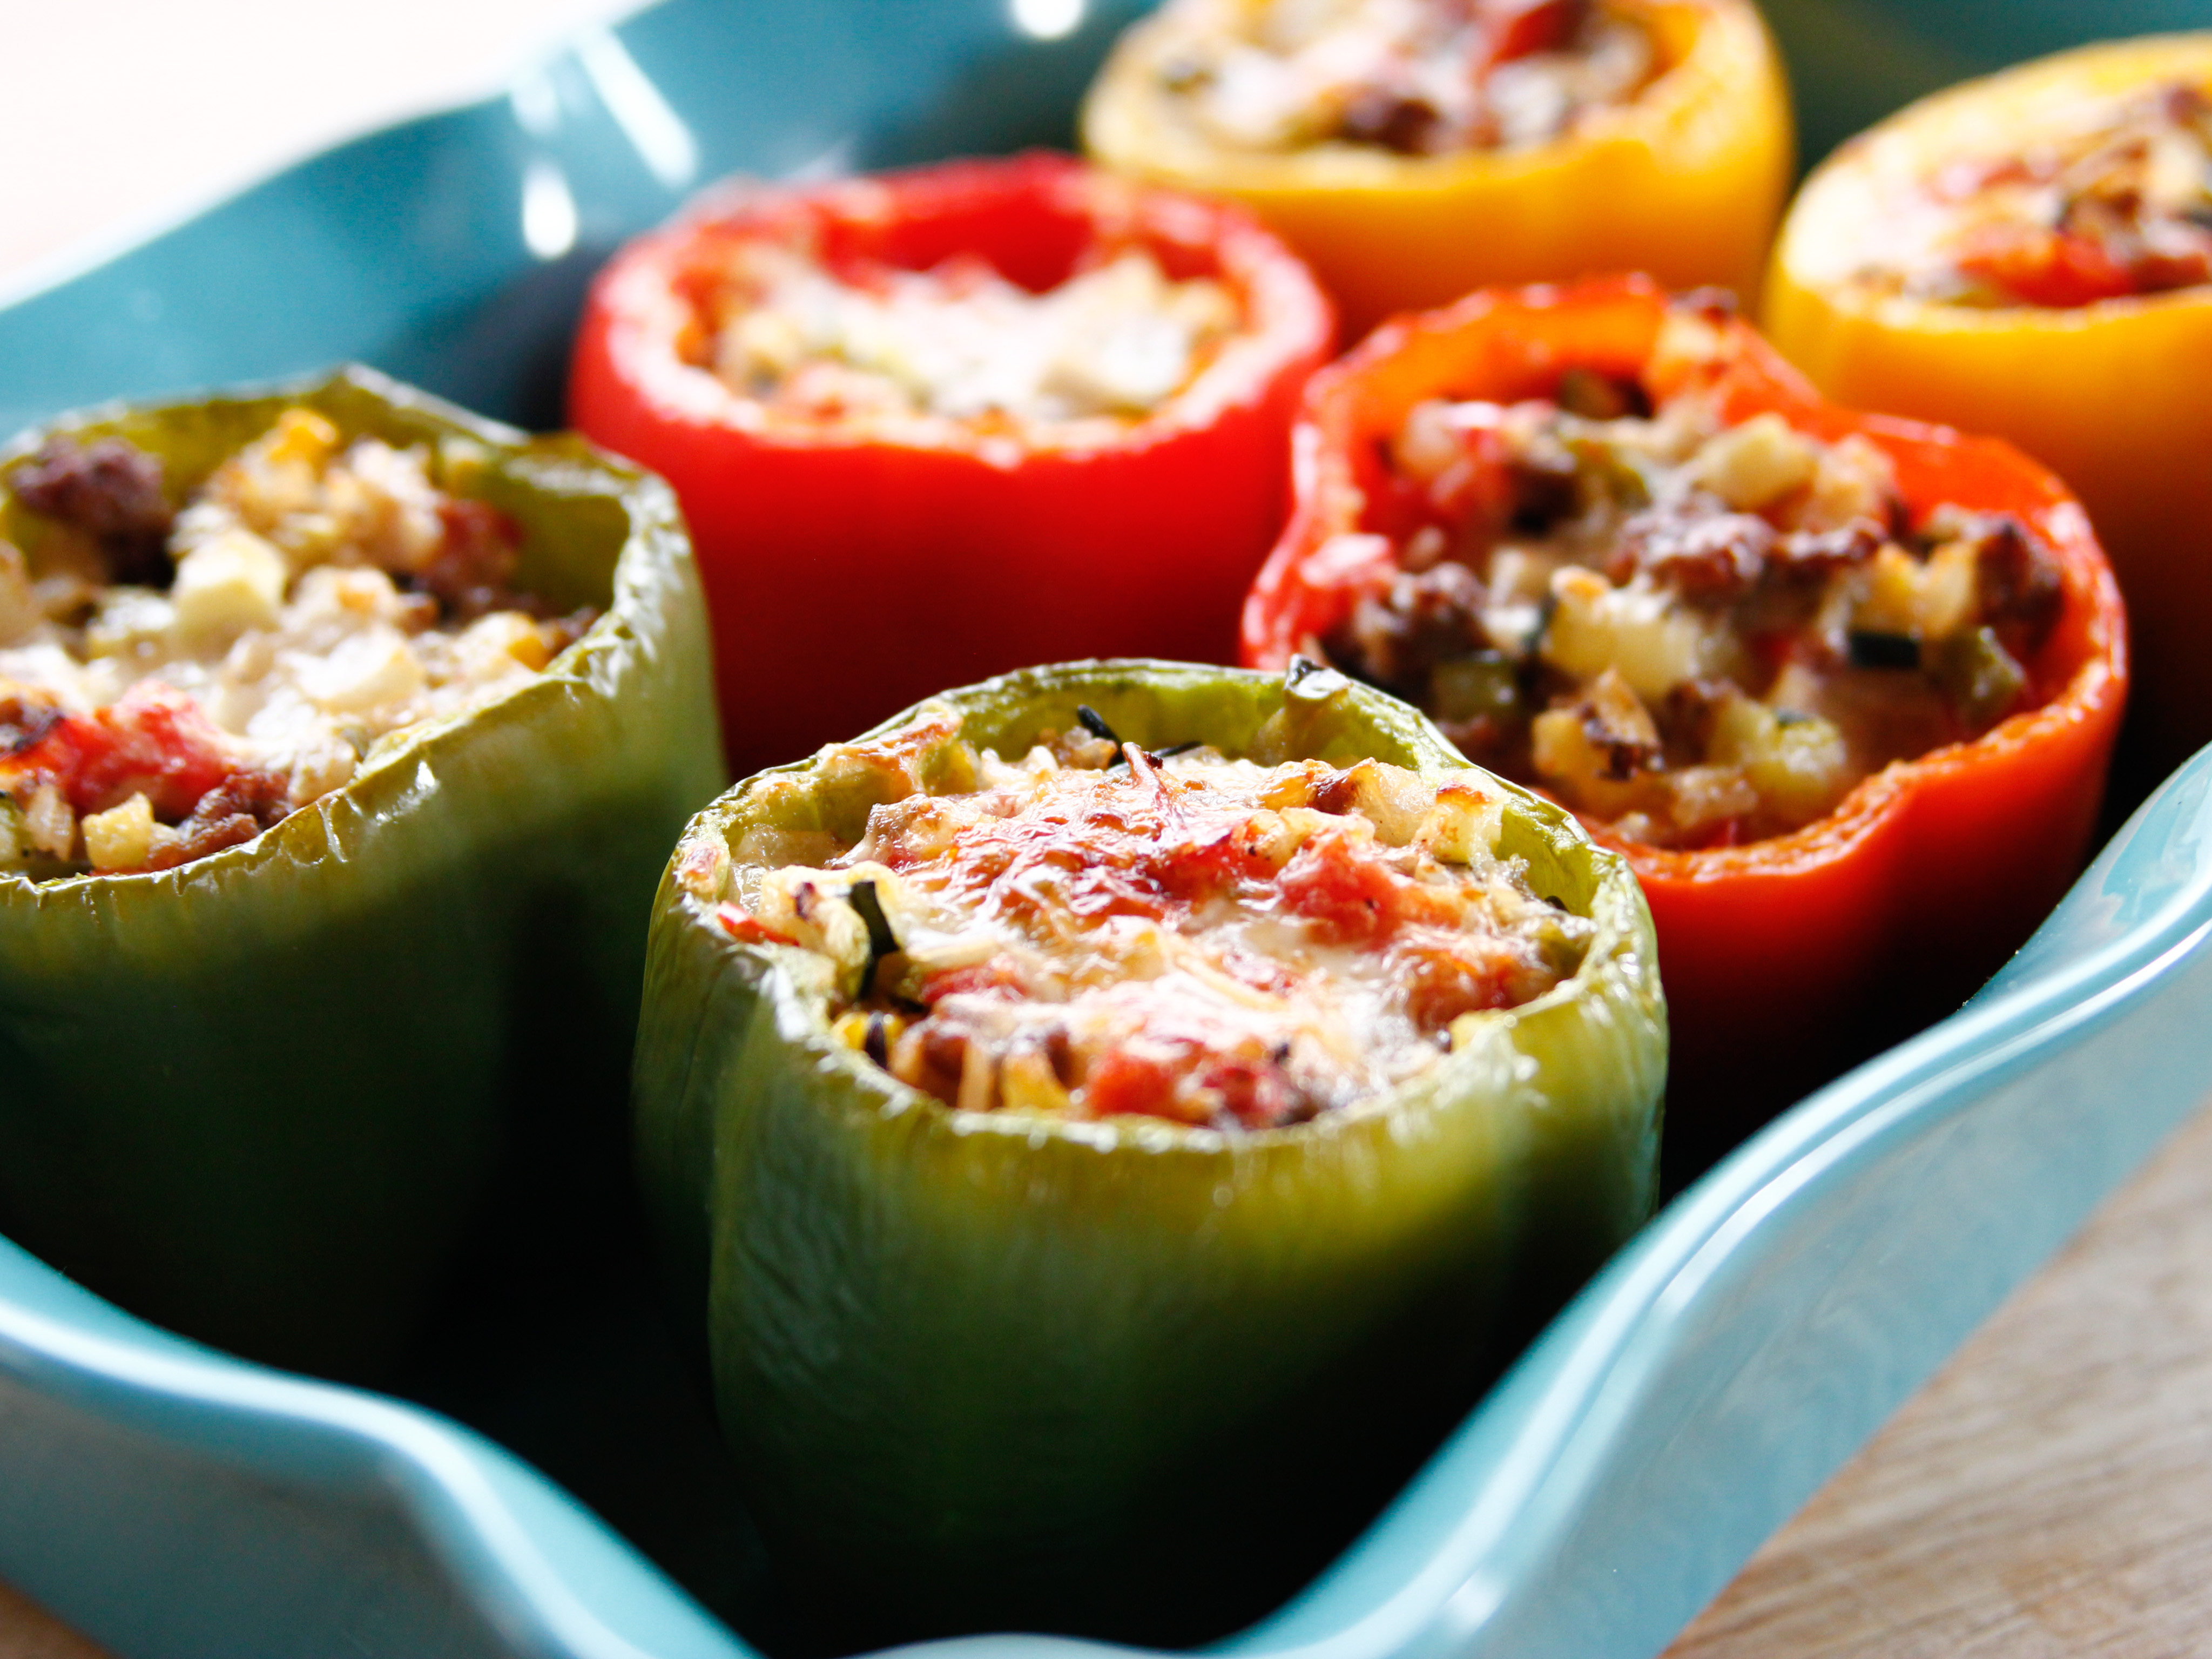 How to Make Stuffed Peppers, Stuffed Peppers Recipe, Ree Drummond